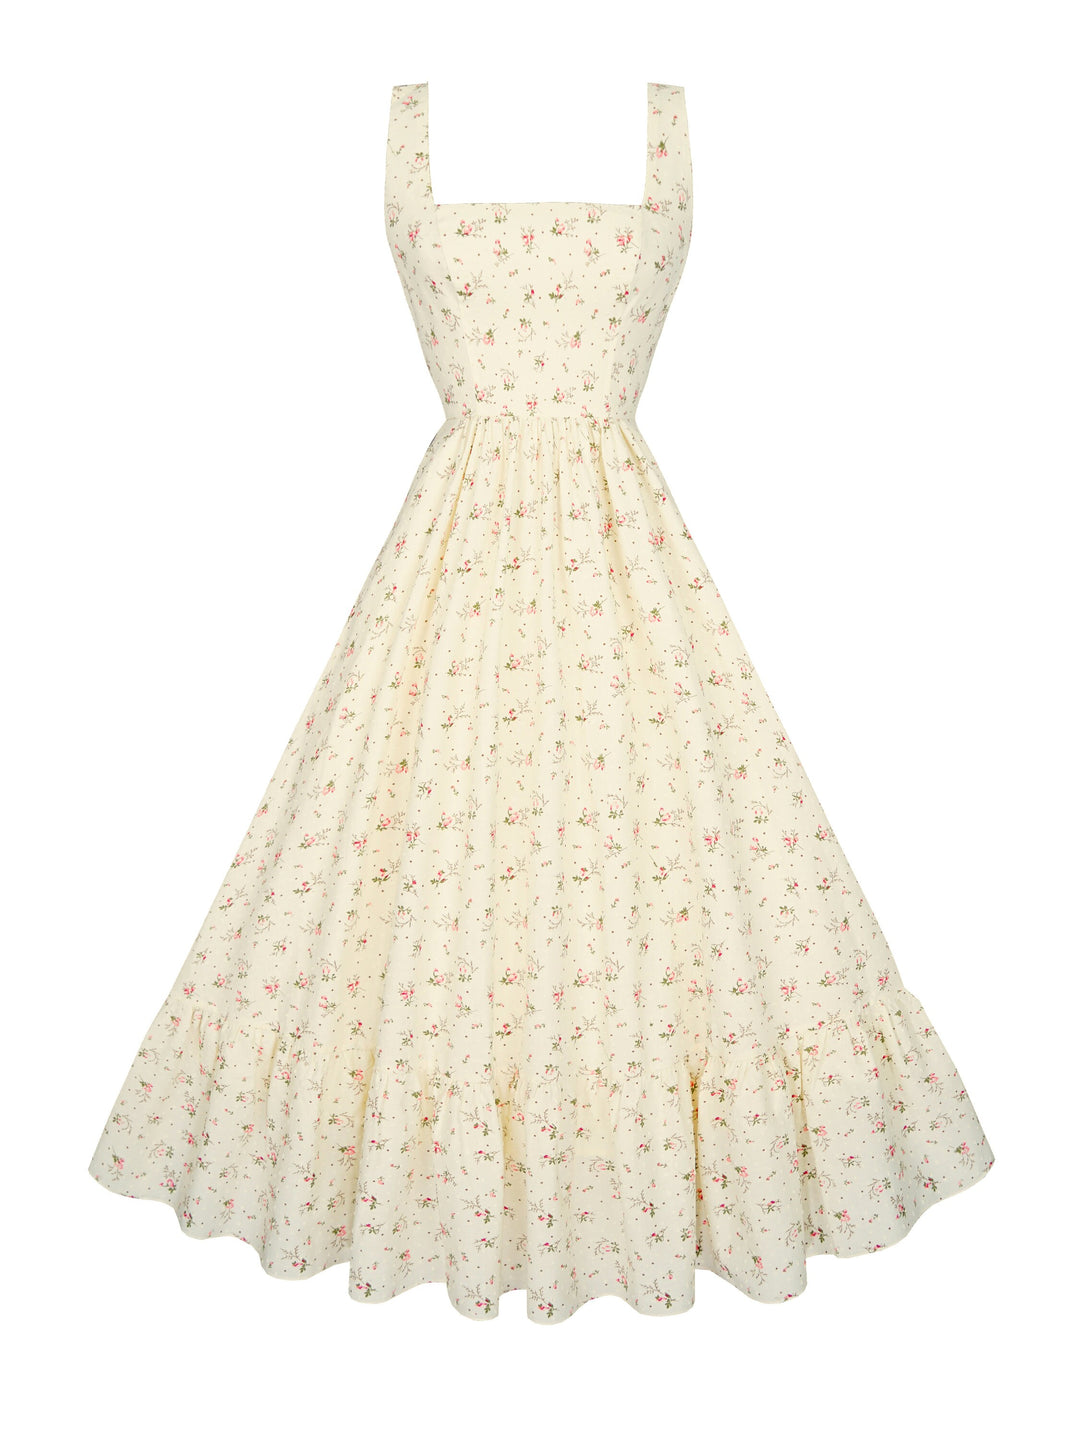 RTS - Size S - Henrietta Dress in Ivory "Ditzy Floral"